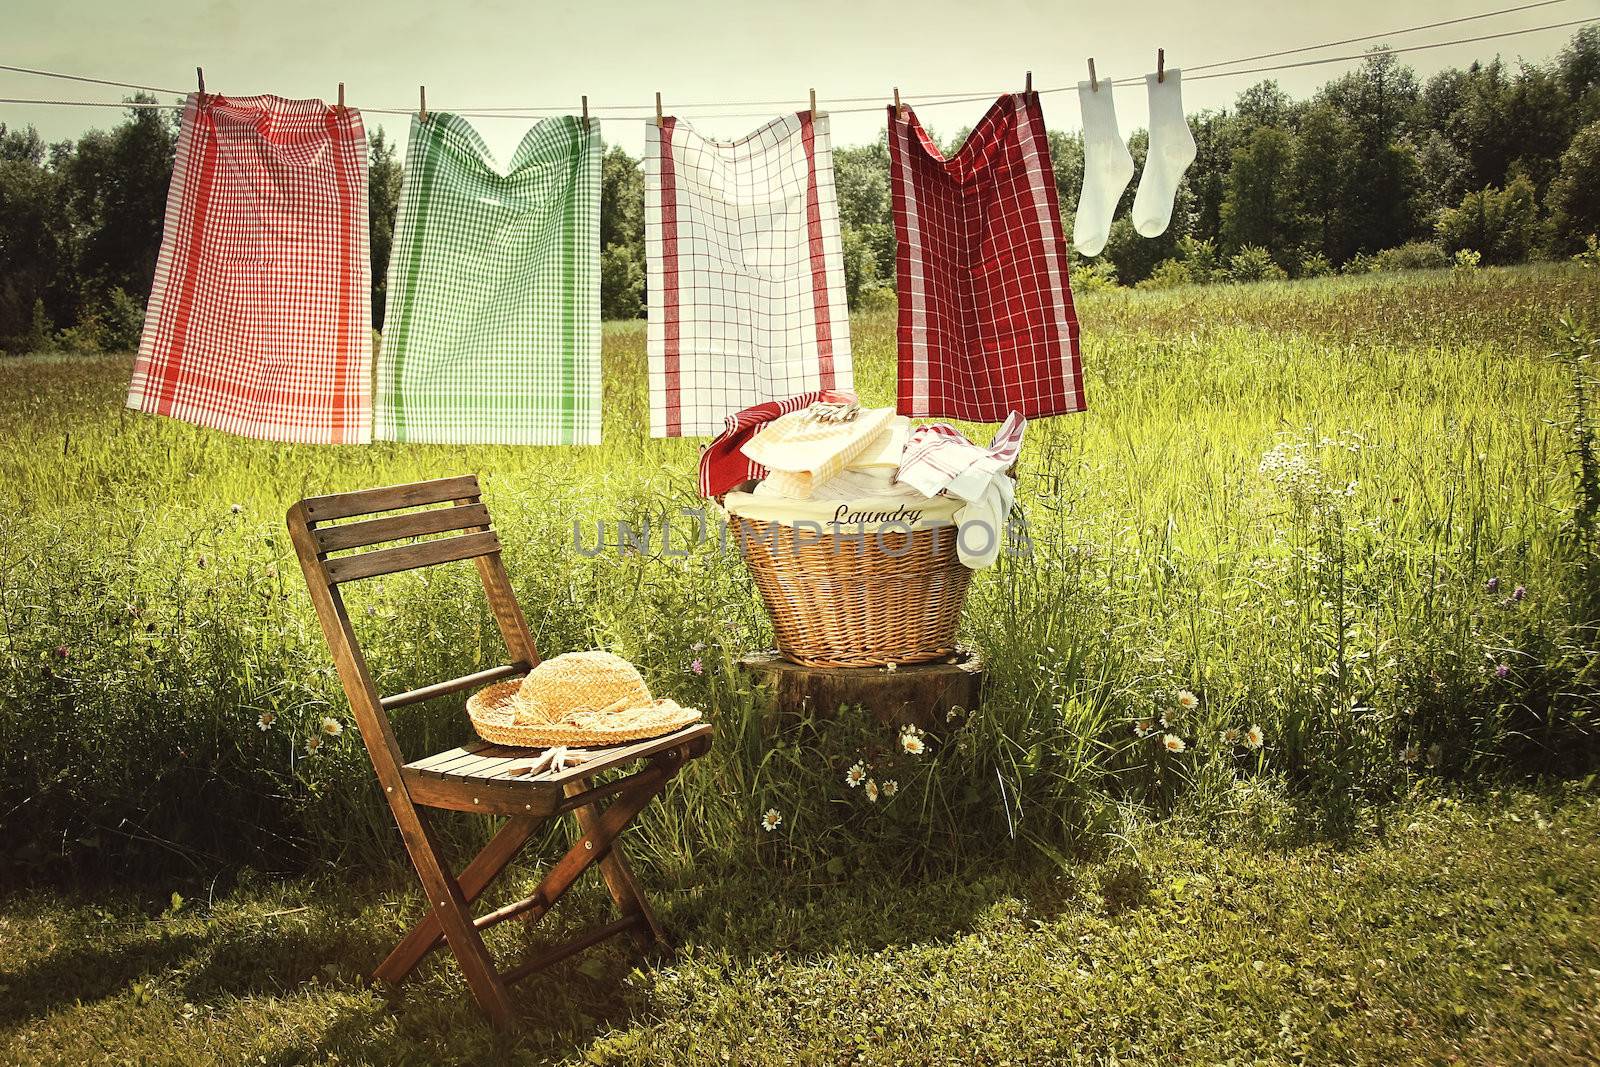 Washing day with laundry on clothesline by Sandralise